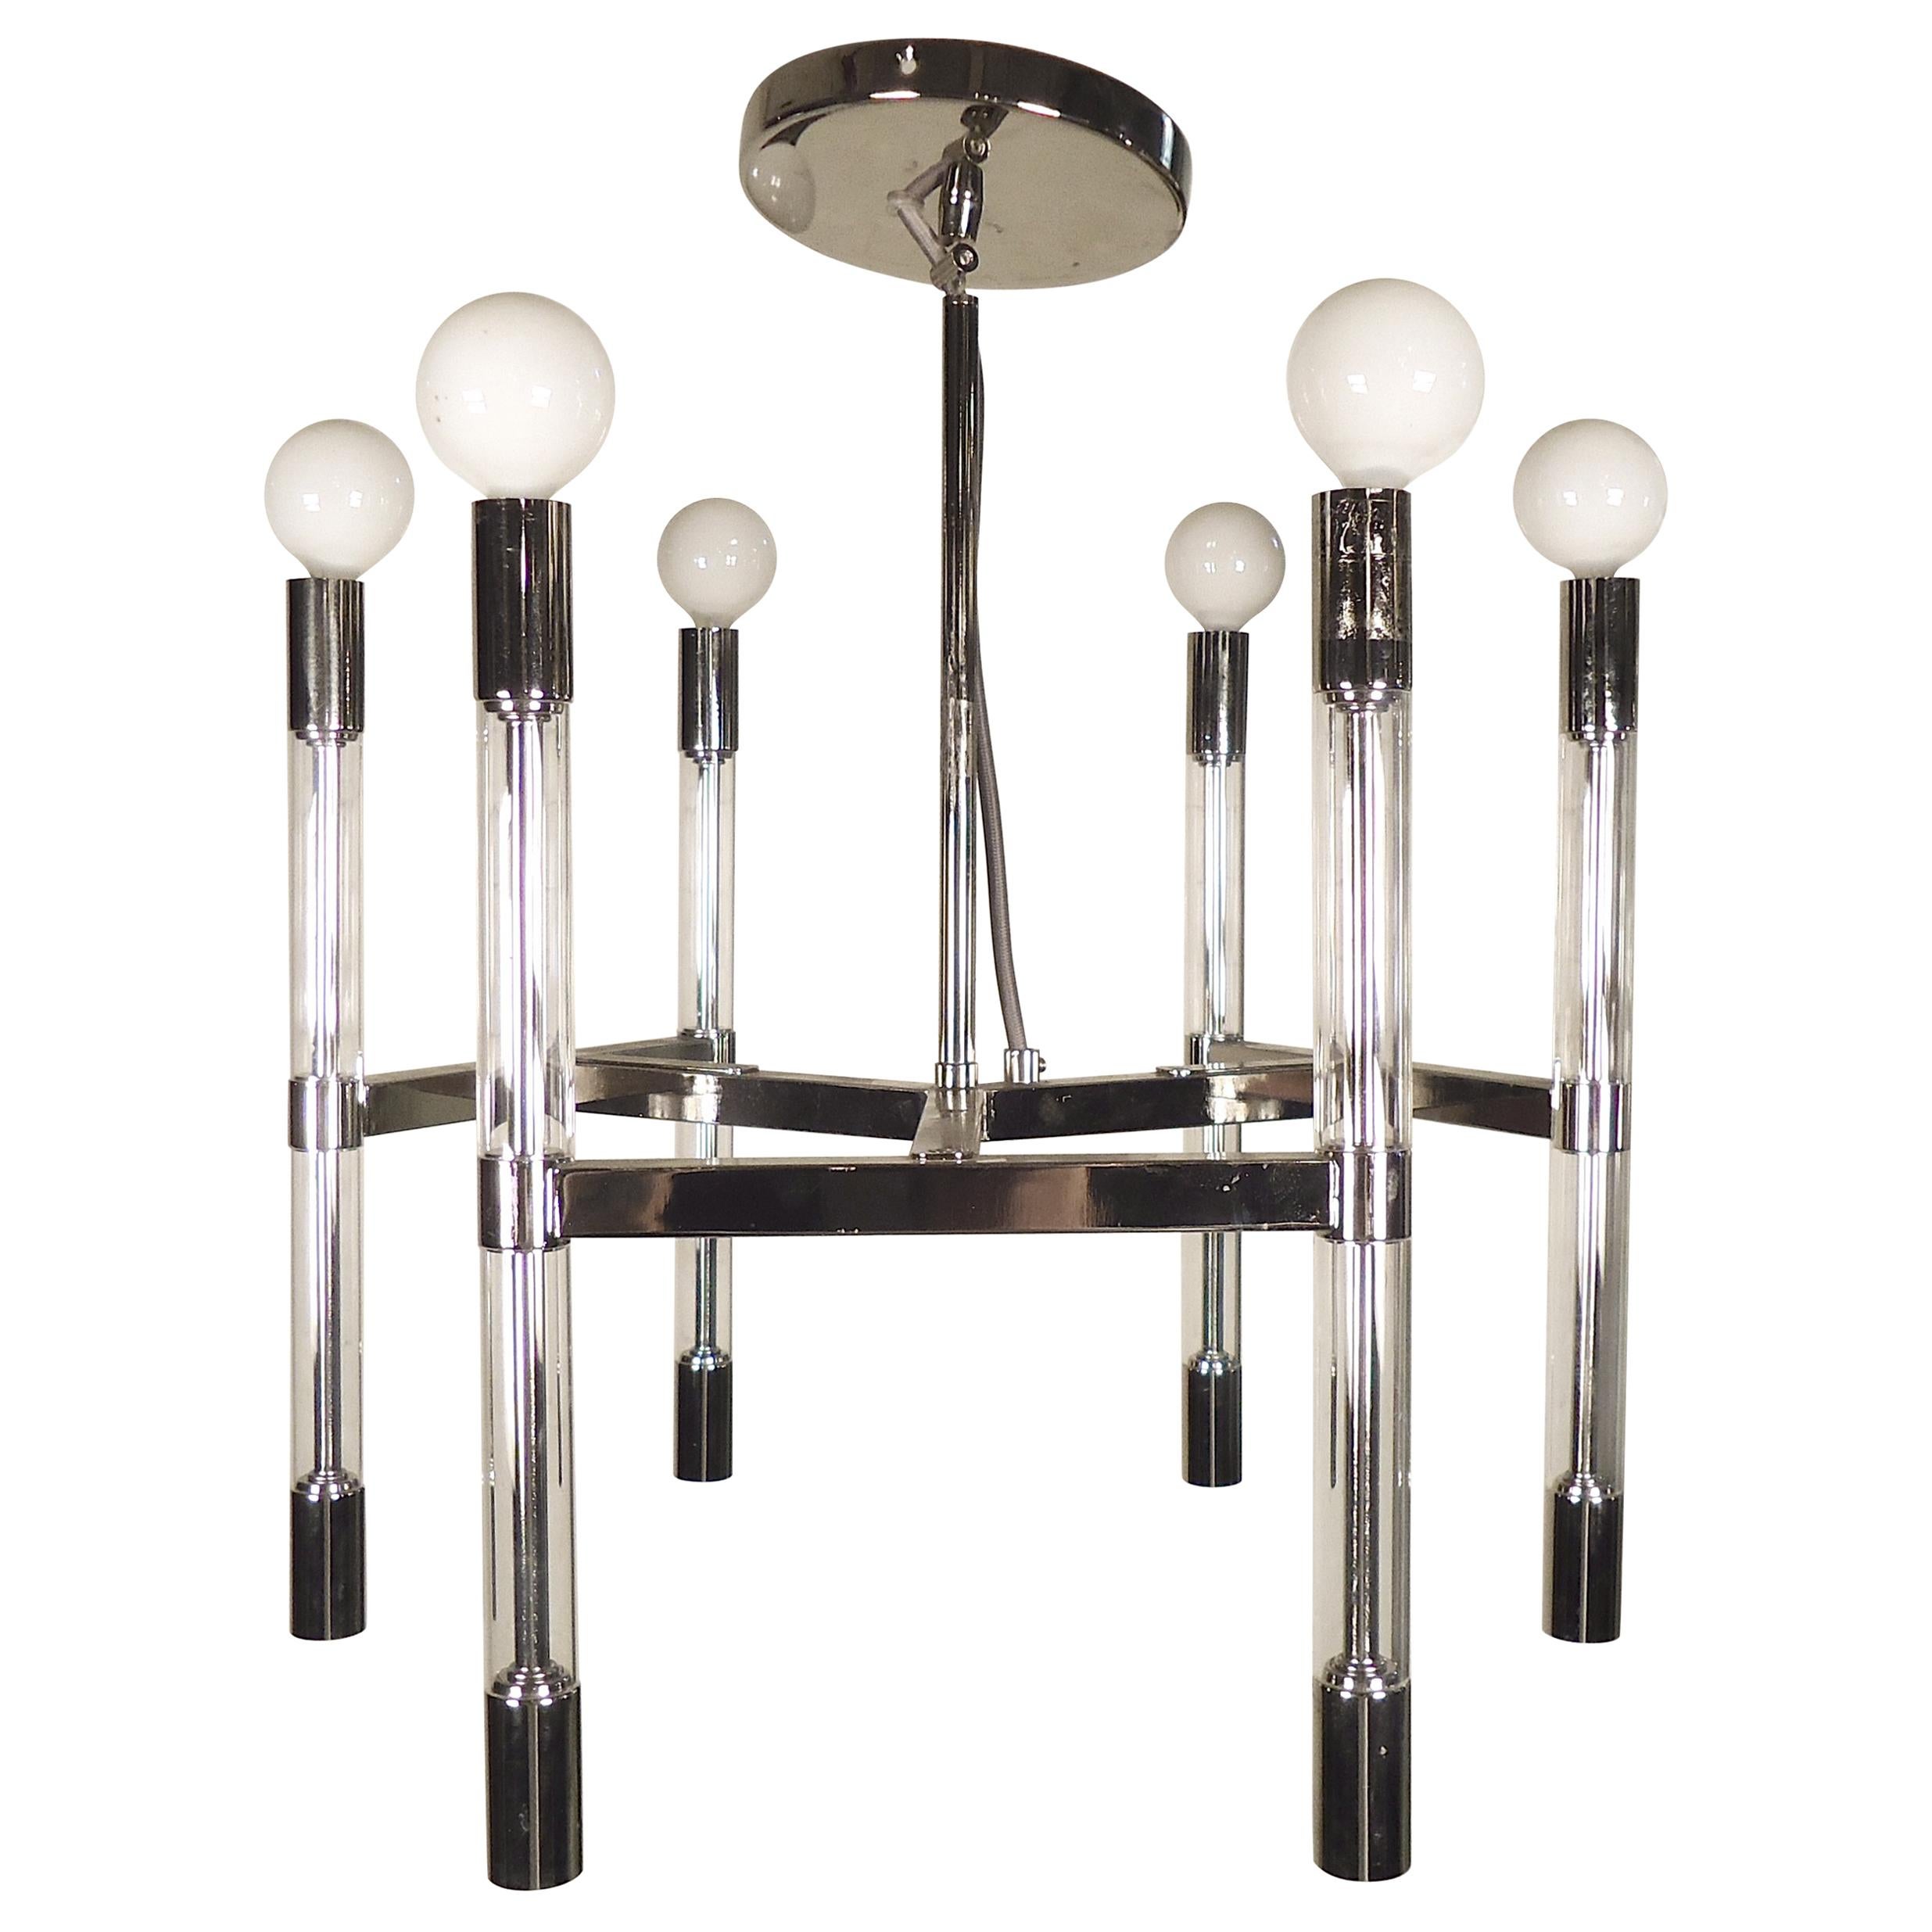 Mid-Century Modern Chrome and Lucite Chandelier